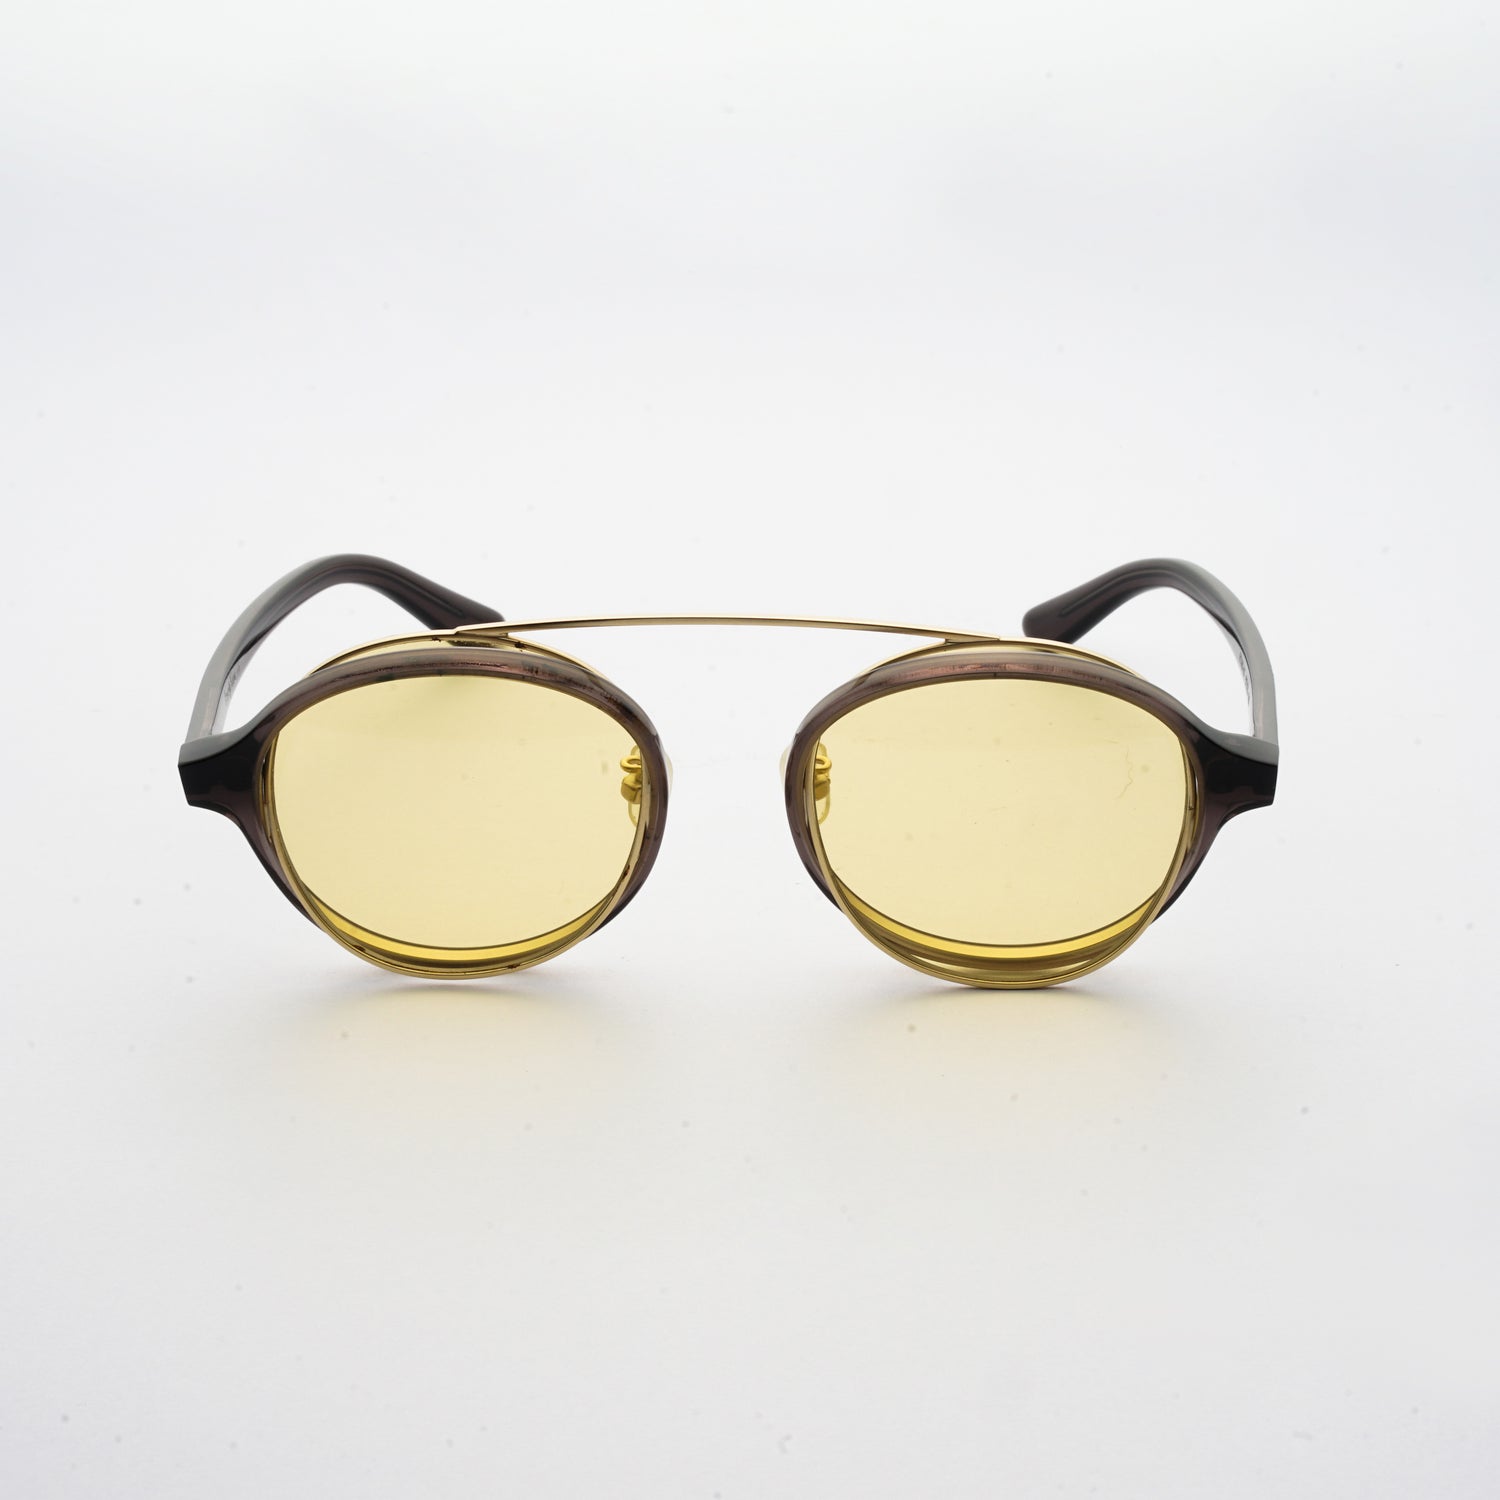 brown acetate round frames with crossed gold rims and light yellow nylon lens front